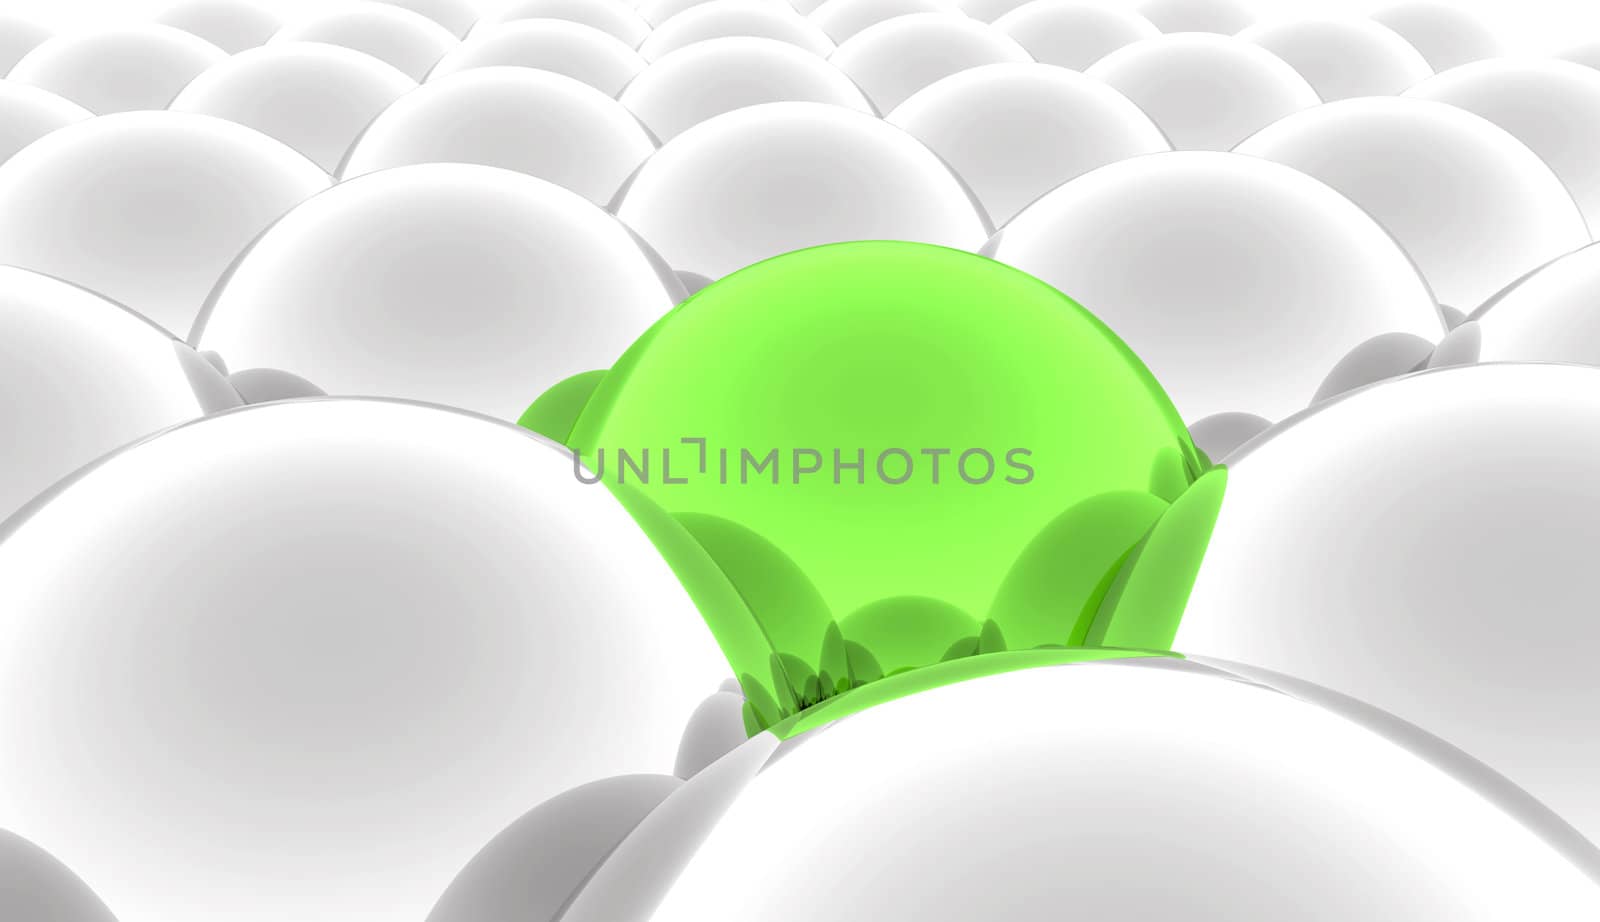 Set of abstract metal balls of grey color and one contrast green